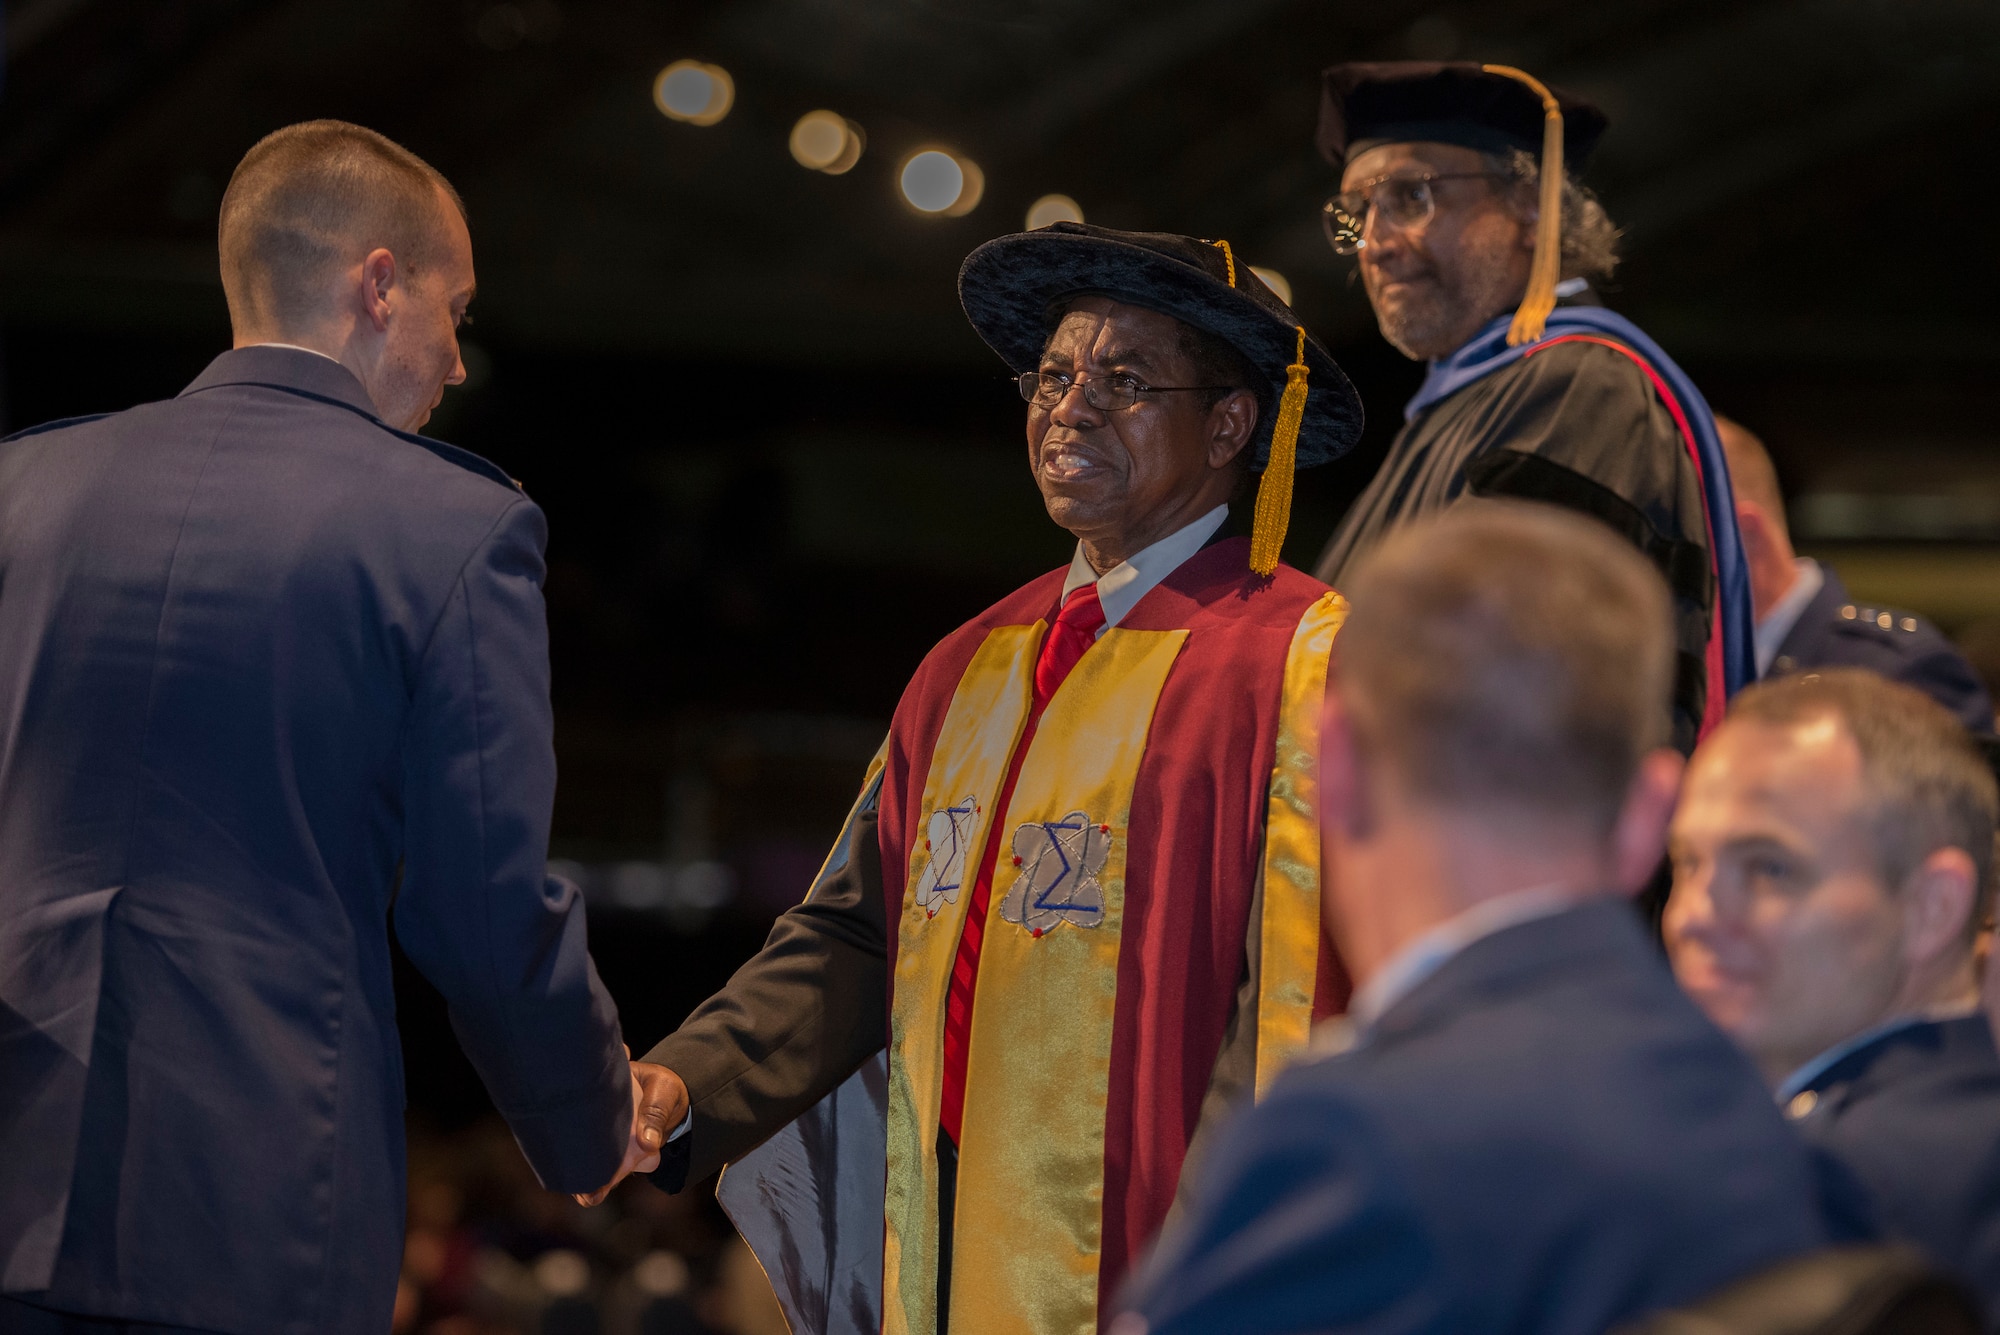 Dr. Adedeji B. Badiru, Dean, Graduate of Engineering and Management at the Air Force Institute of Technology congratulates a graduate during the Air Force Institute of Technology Commencement Ceremony March 24, 2016 at the National Museum of United States Air Force. AFIT represents a collection of like-minded scholars, students, researchers, and administrators dedicated to sustaining the intellectual superiority of the defense programs of the United States.  (U.S. Air Force photo by Michelle Gigante) 